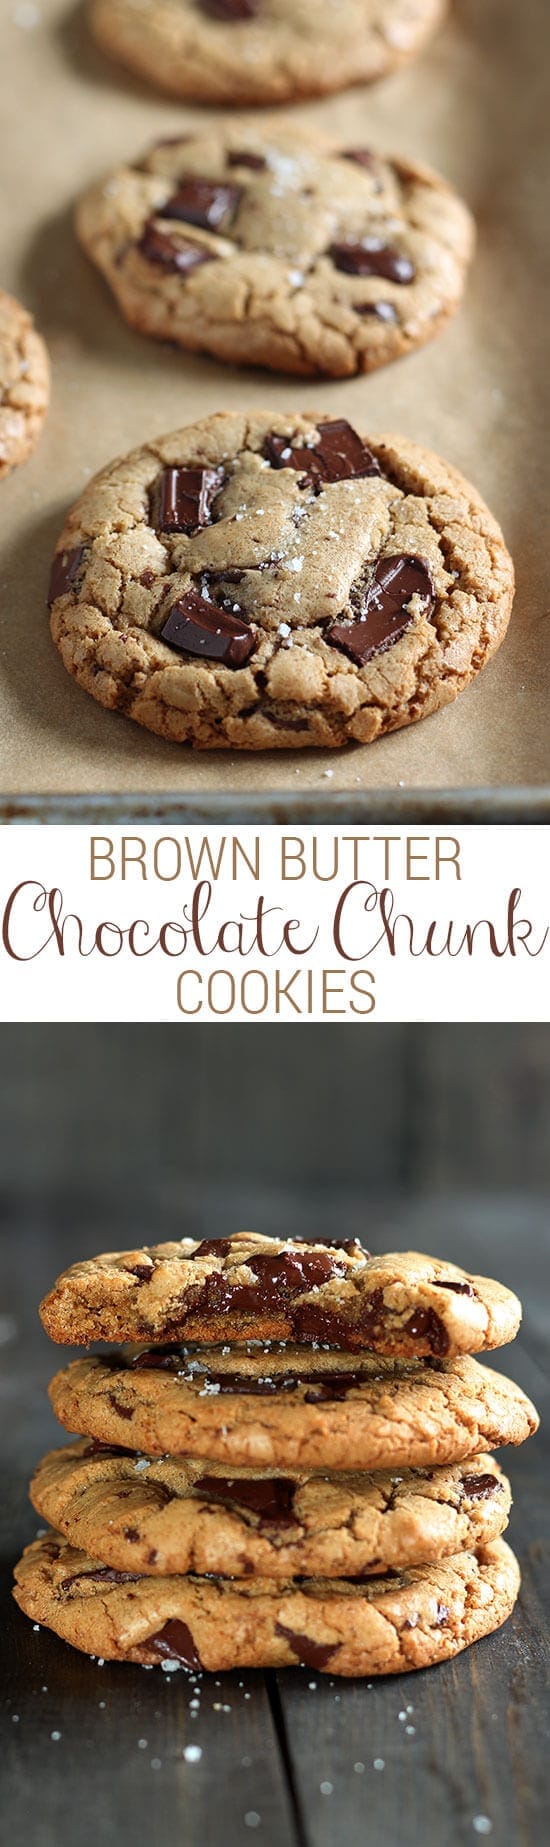 If you like CHEWY and tons of flavor in your cookies - this is the recipe for you! No mixer required and no chilling!